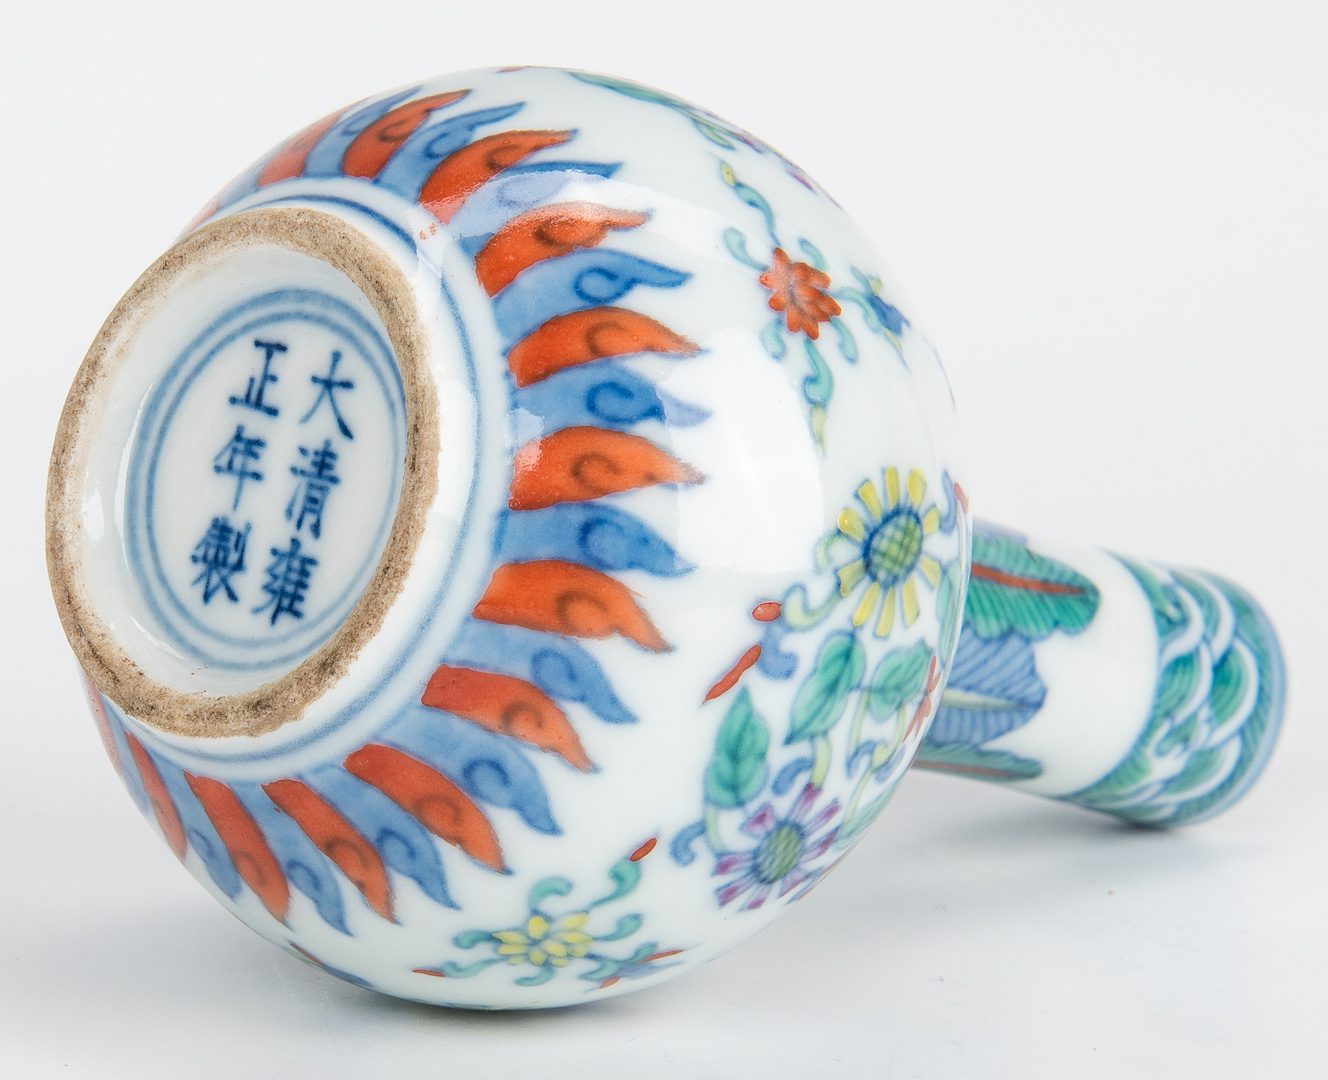 Lot 10: 3 Chinese Porcelain Items, incl. miniature